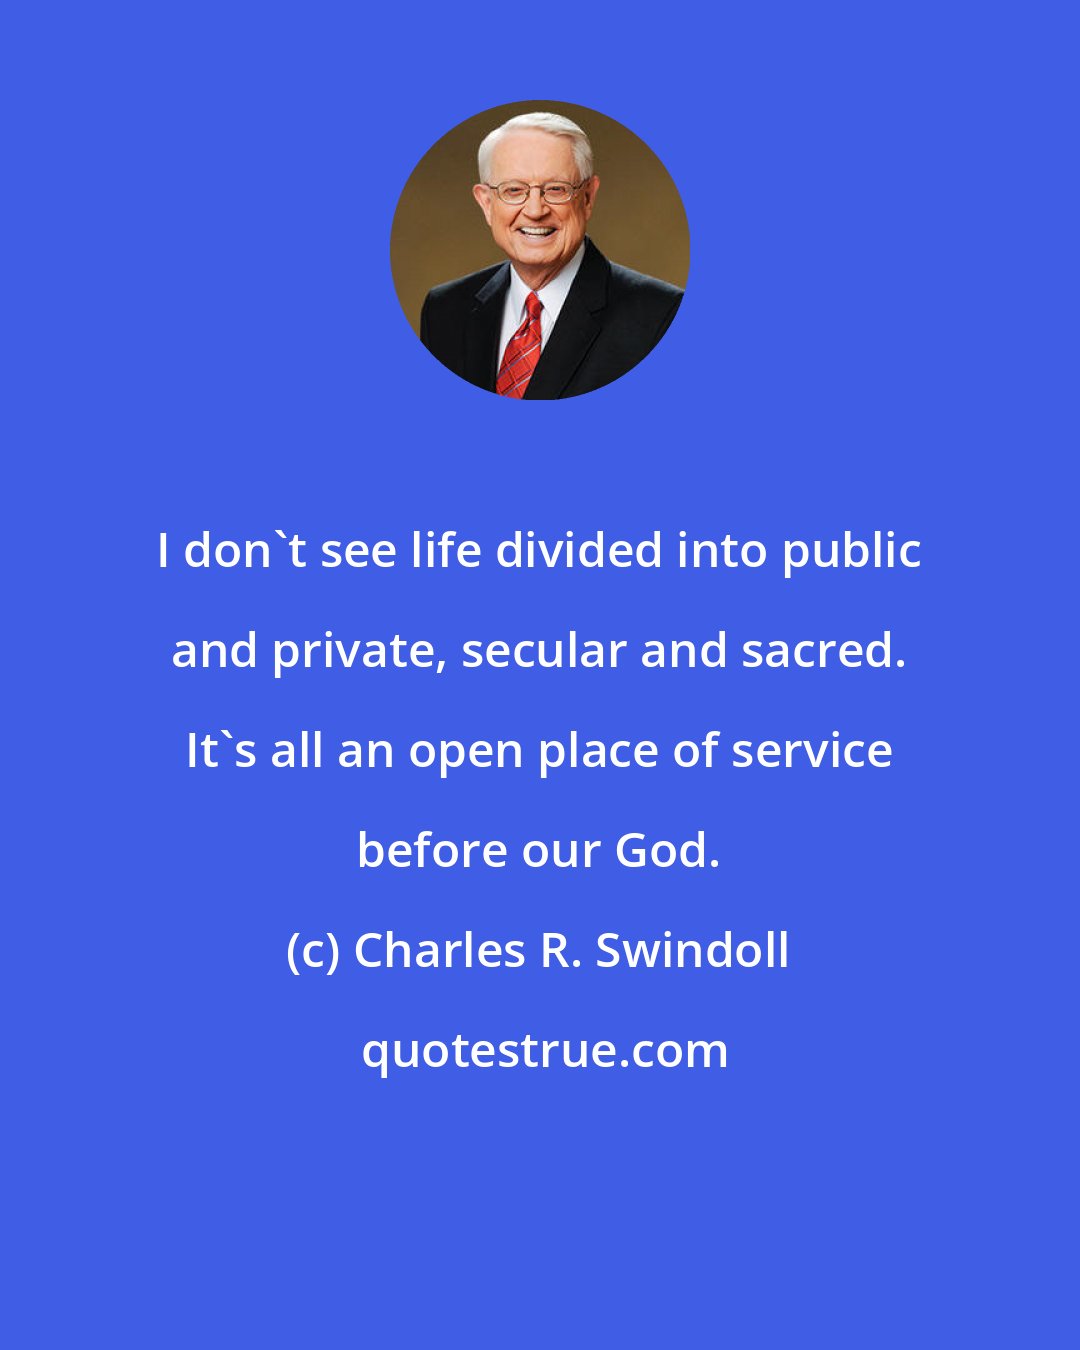 Charles R. Swindoll: I don't see life divided into public and private, secular and sacred. It's all an open place of service before our God.